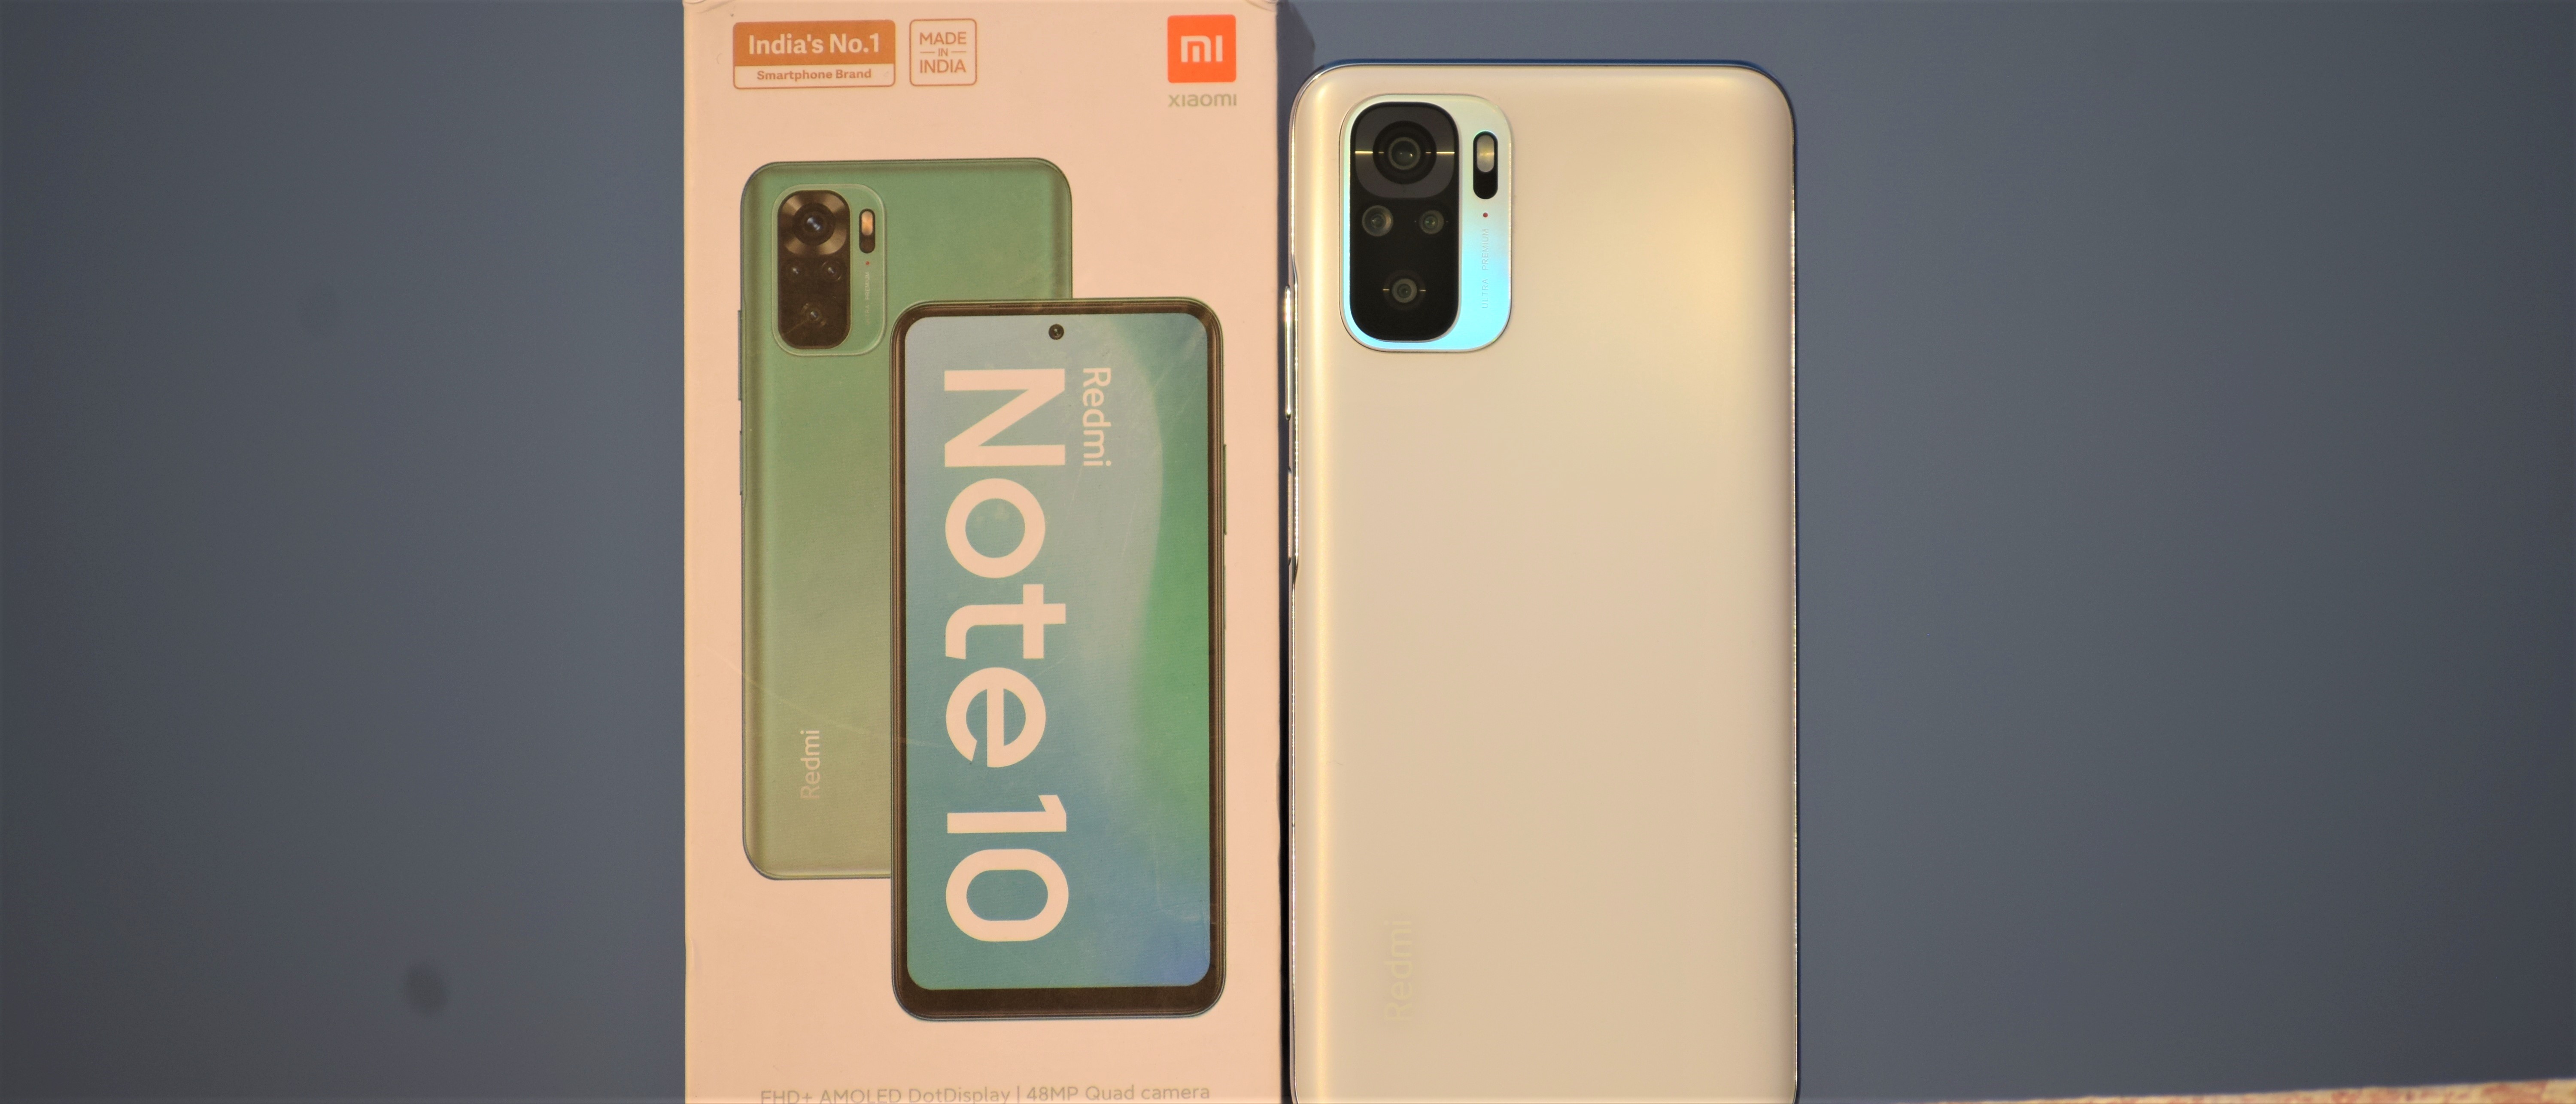 Redmi Note 10 - @₹13,999 | The New Champ10n